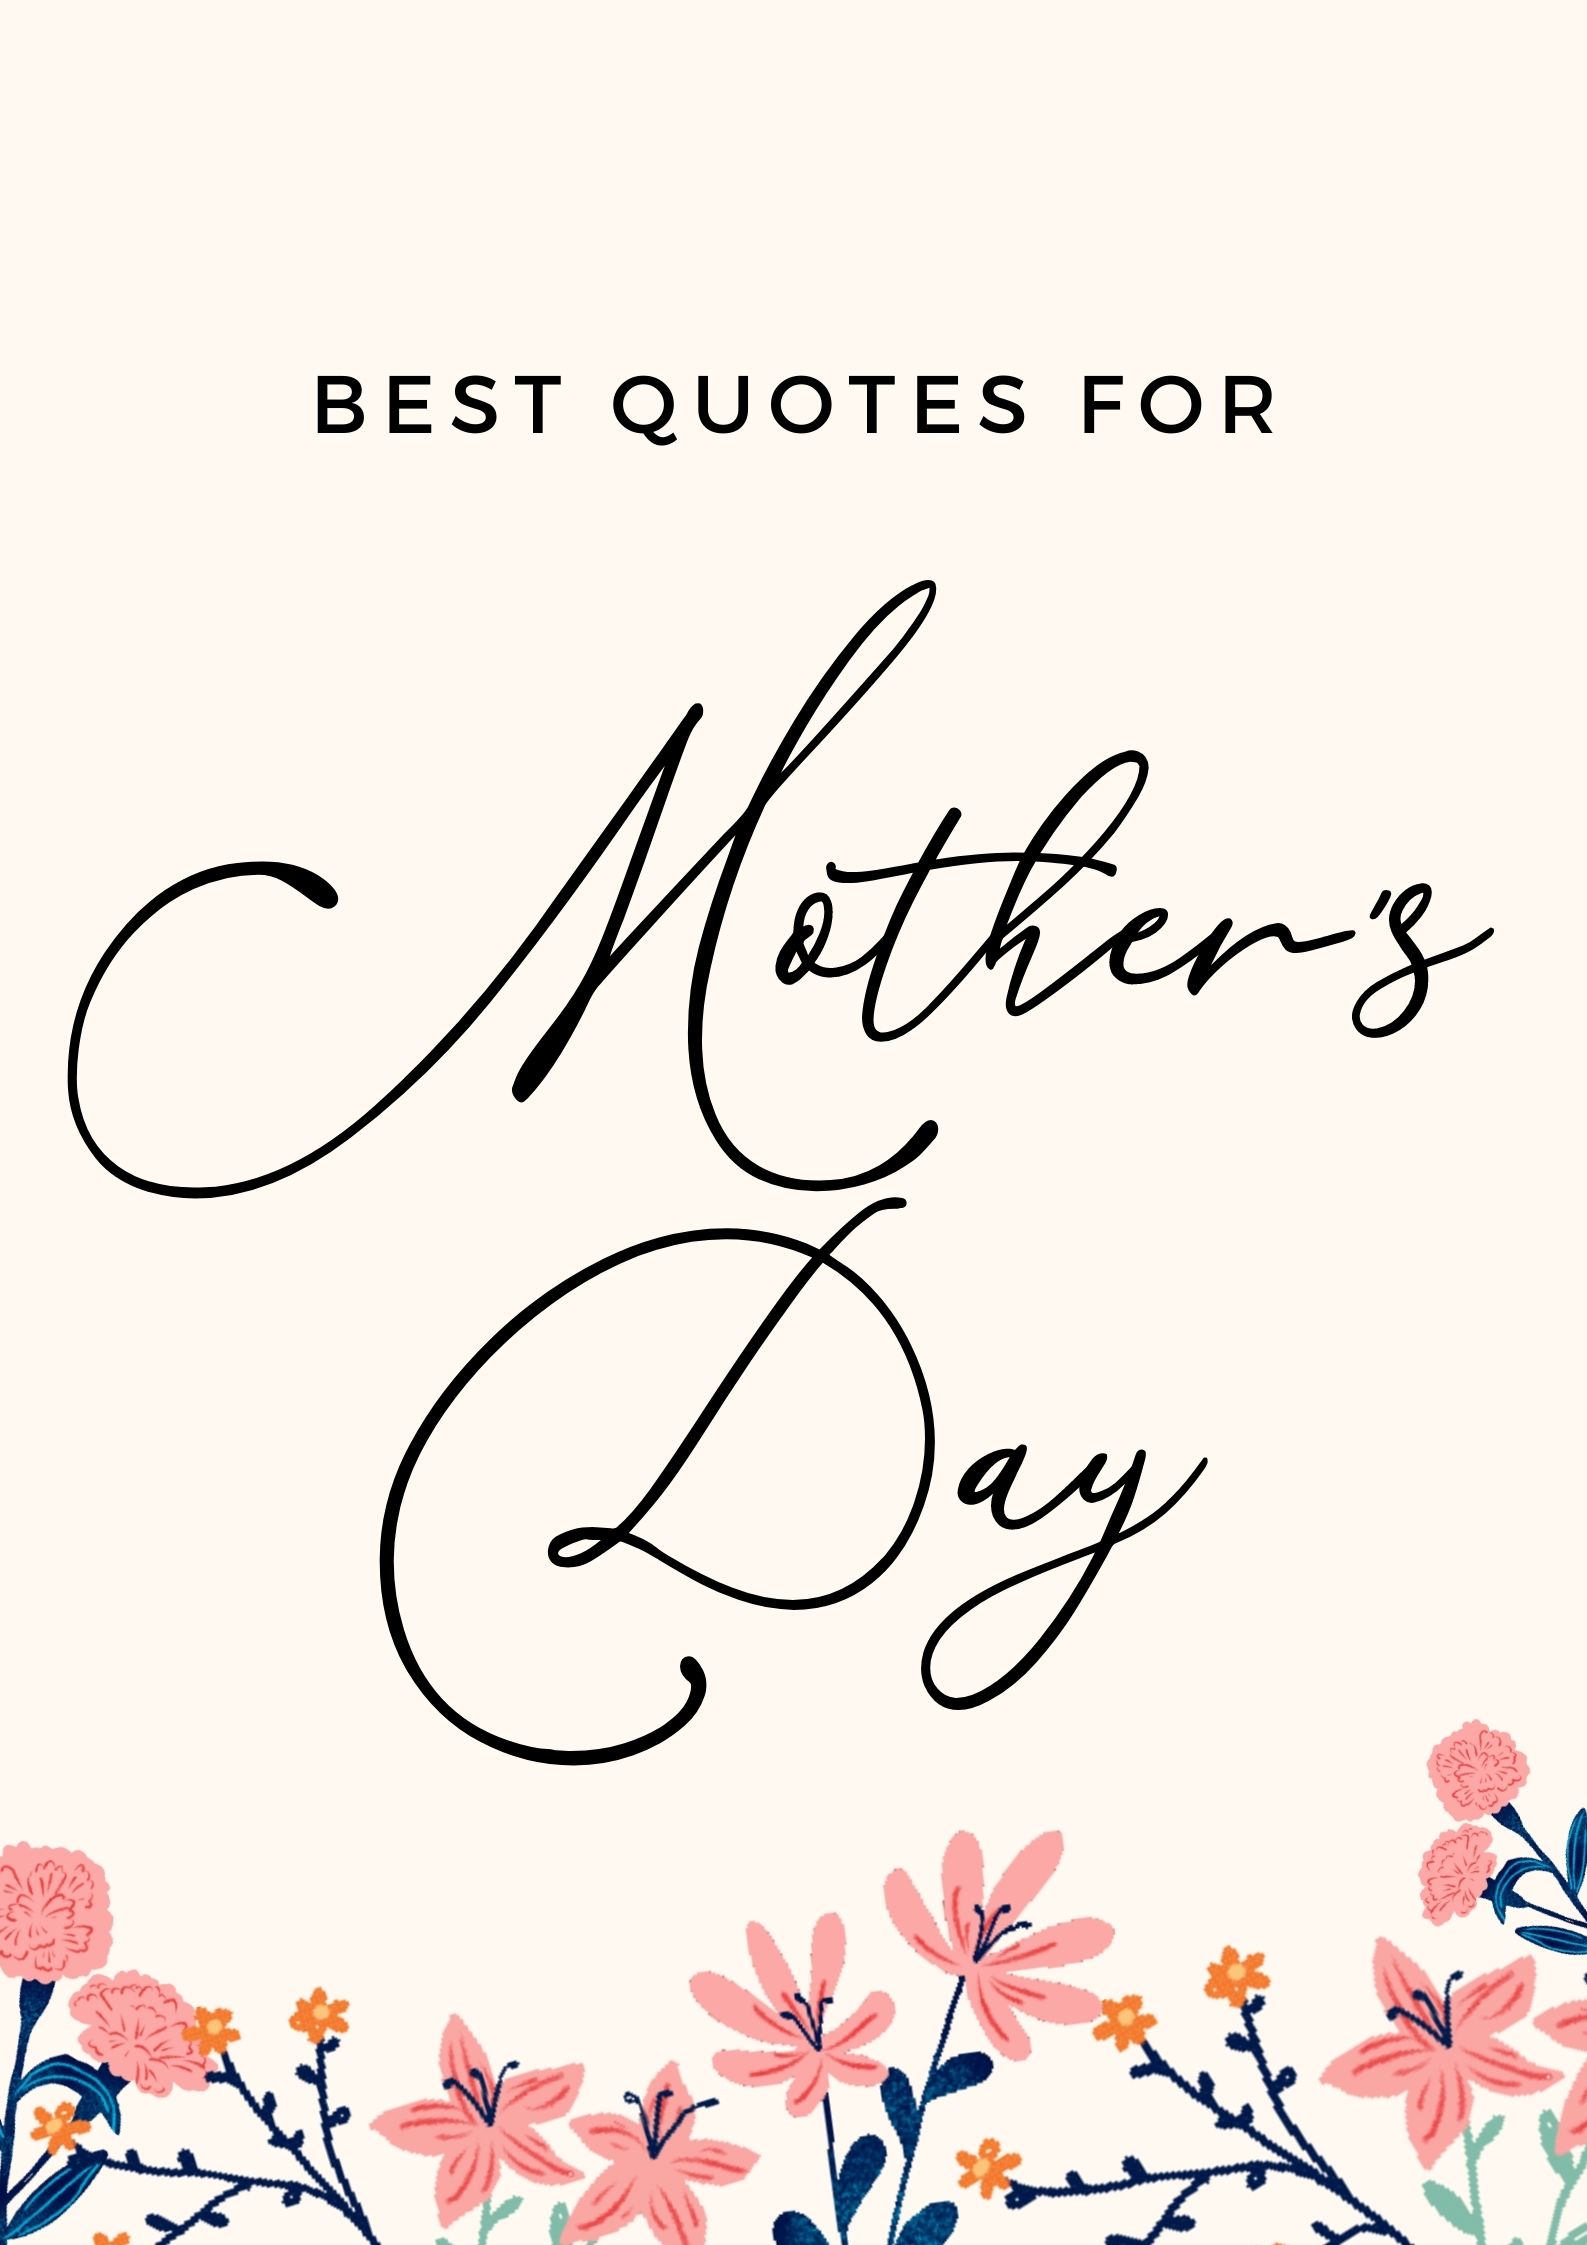 Mother's Day Quotes and digital cards 